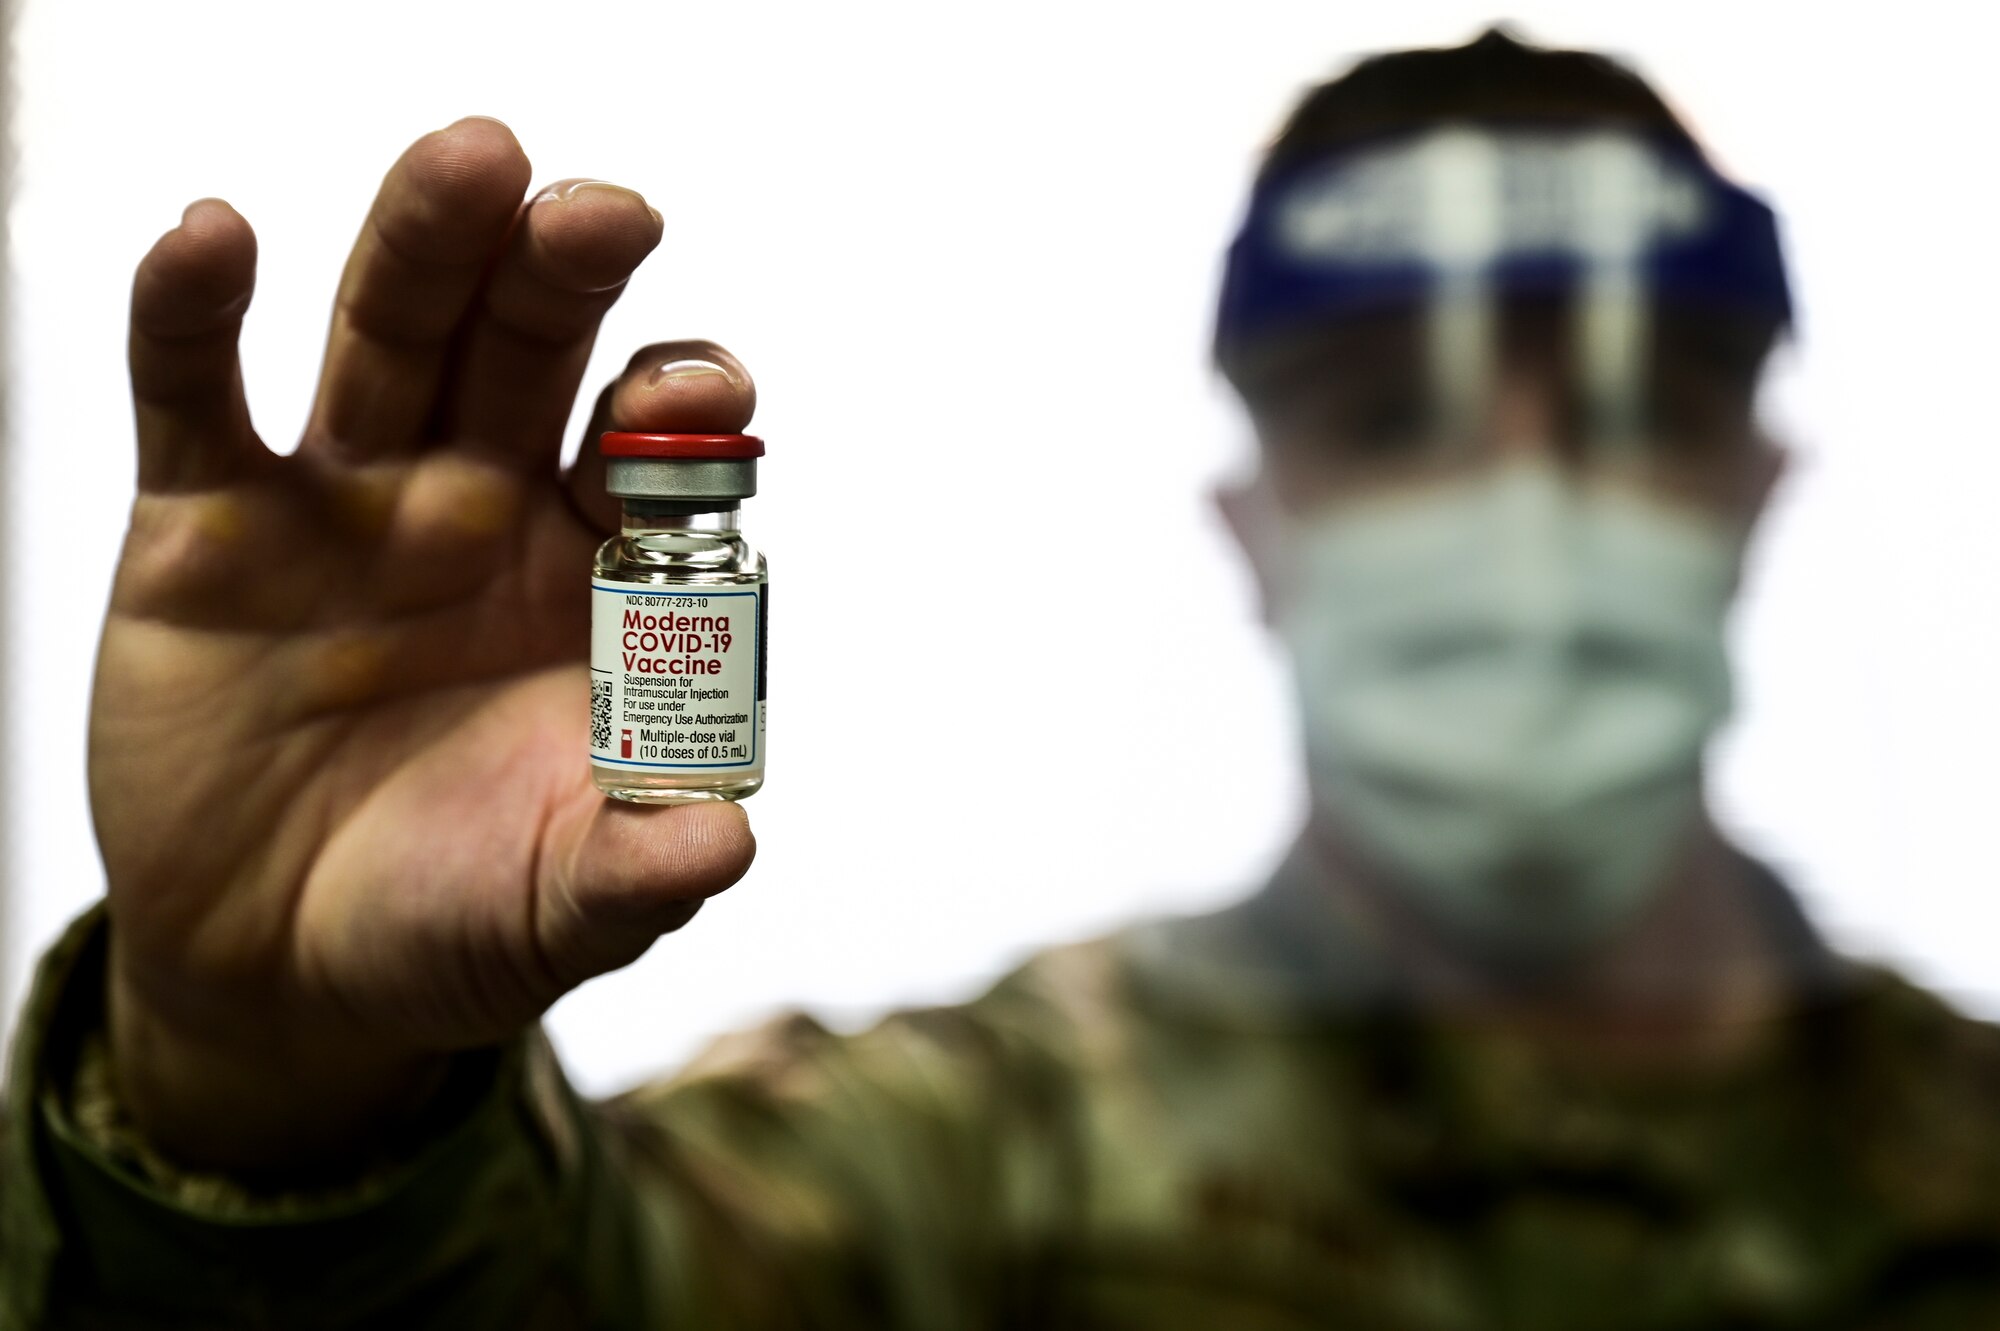 Tech. Sgt. Joseph Anthony, 911th Aeromedical Staging Squadron aeromedical technician, holds a COVID-19 vaccine vial at the Pittsburgh International Airport Air Reserve Station, Pennsylvania, Feb. 4, 2021.